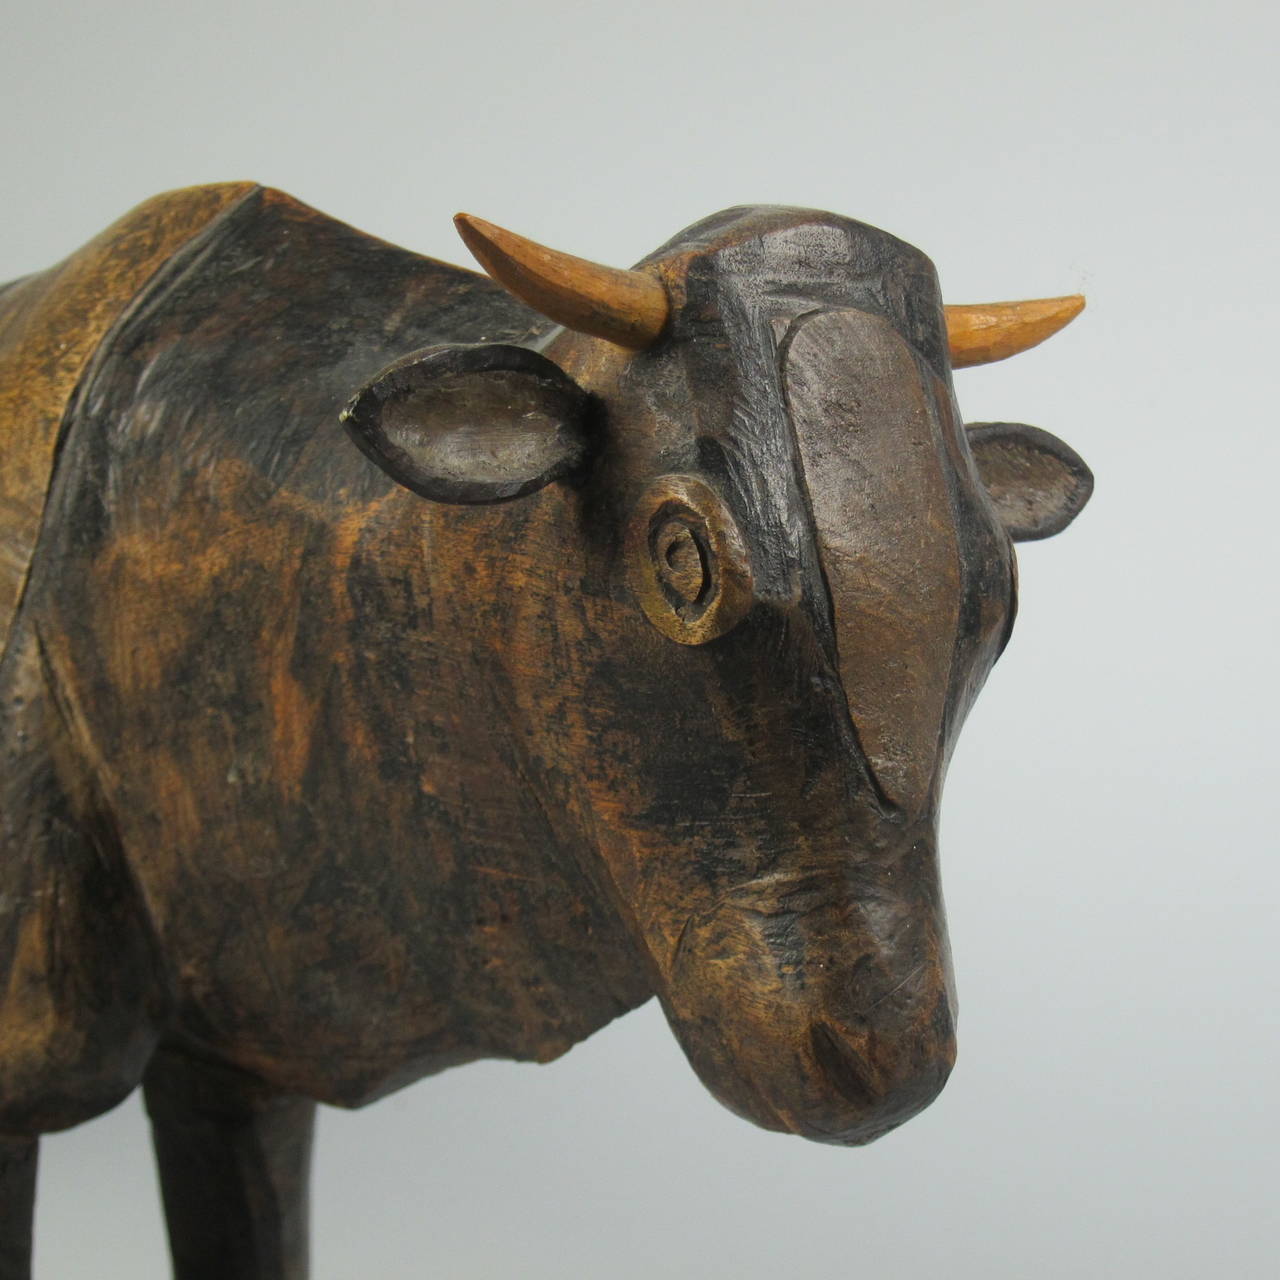 A large 19th-early 20th century North Nguni carving of a bull. 

The ancestors of Nguni cattle were brought by the Xhosa, Zulu and Swazi people, during their migration to Southern Africa between 600 and 1400 AD. Since then, these animals have